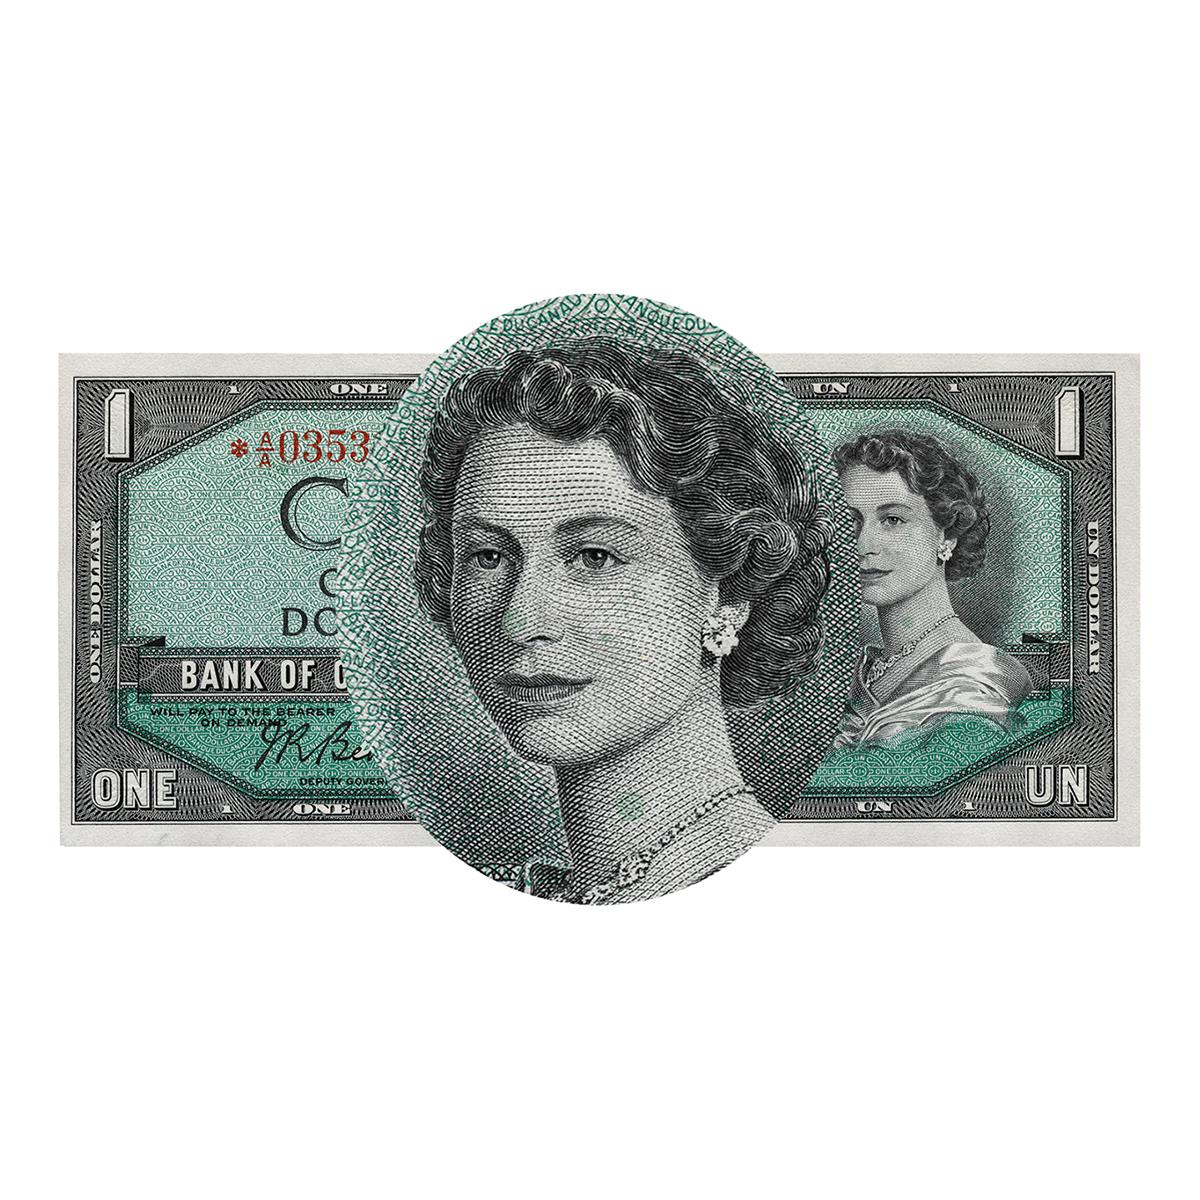 Bank note portrait of a young woman with wavy hair and a pearl necklace.